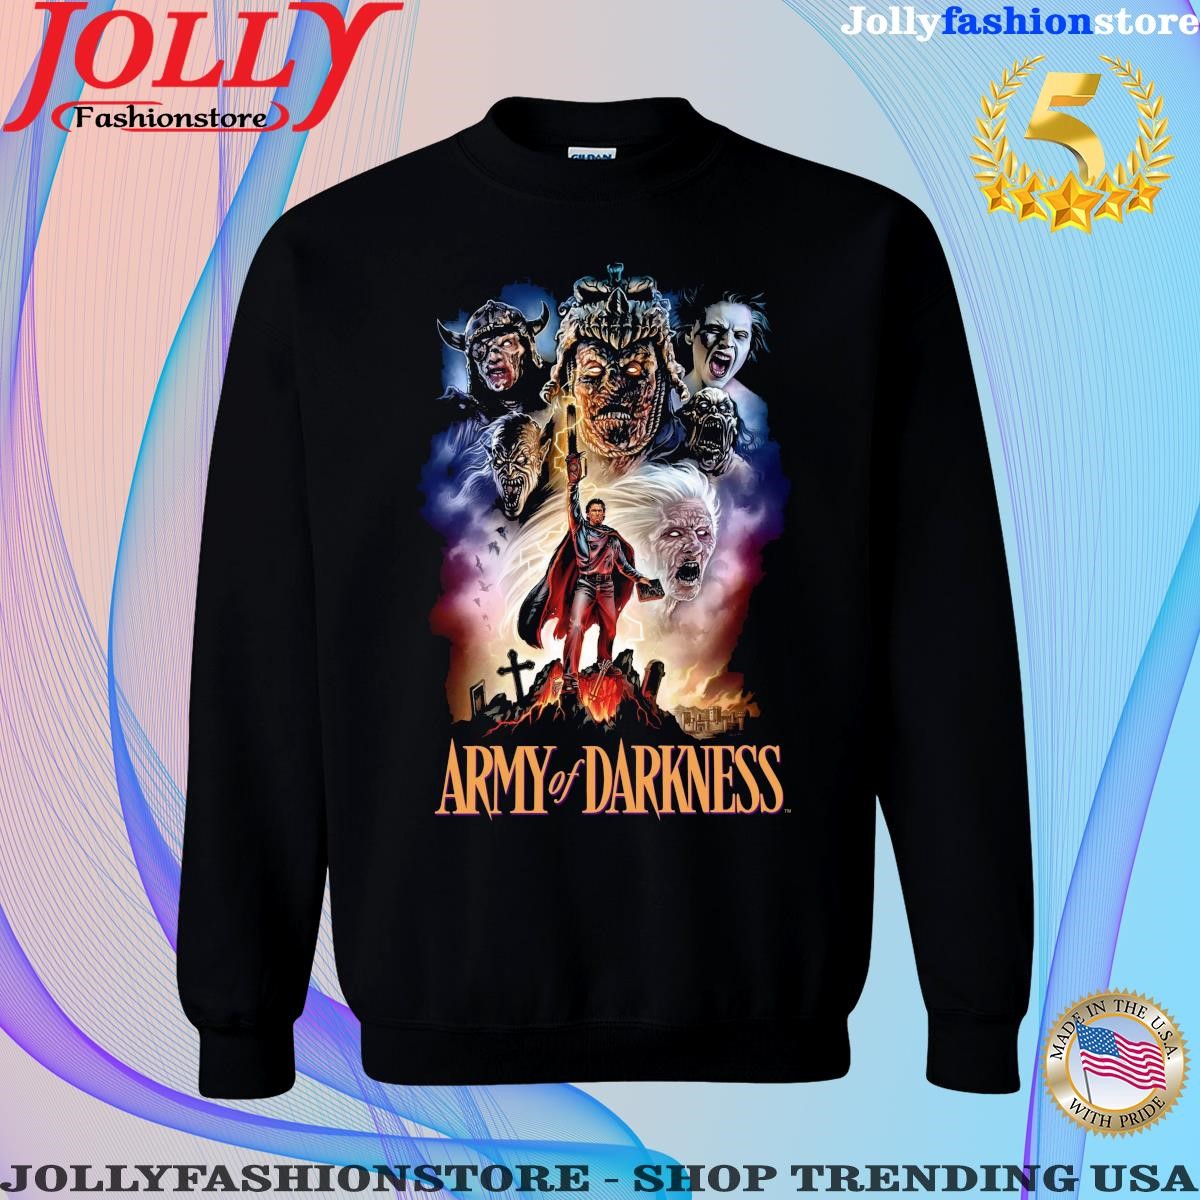 Long live the king army of darkness shirt Sweatshirt.png